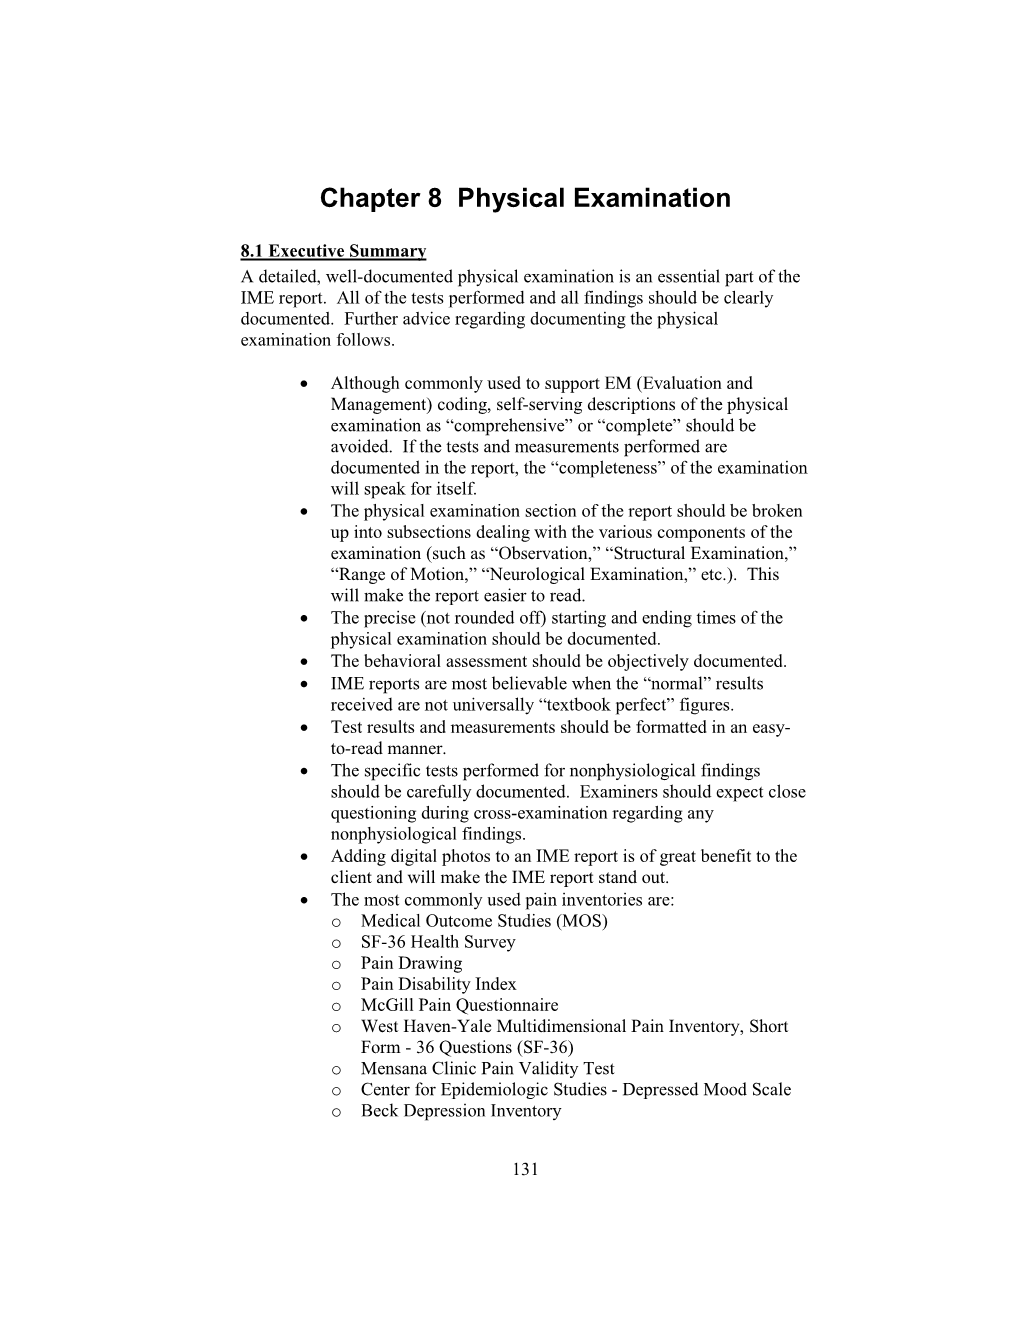 Chapter Background Information and Transmittal Letters